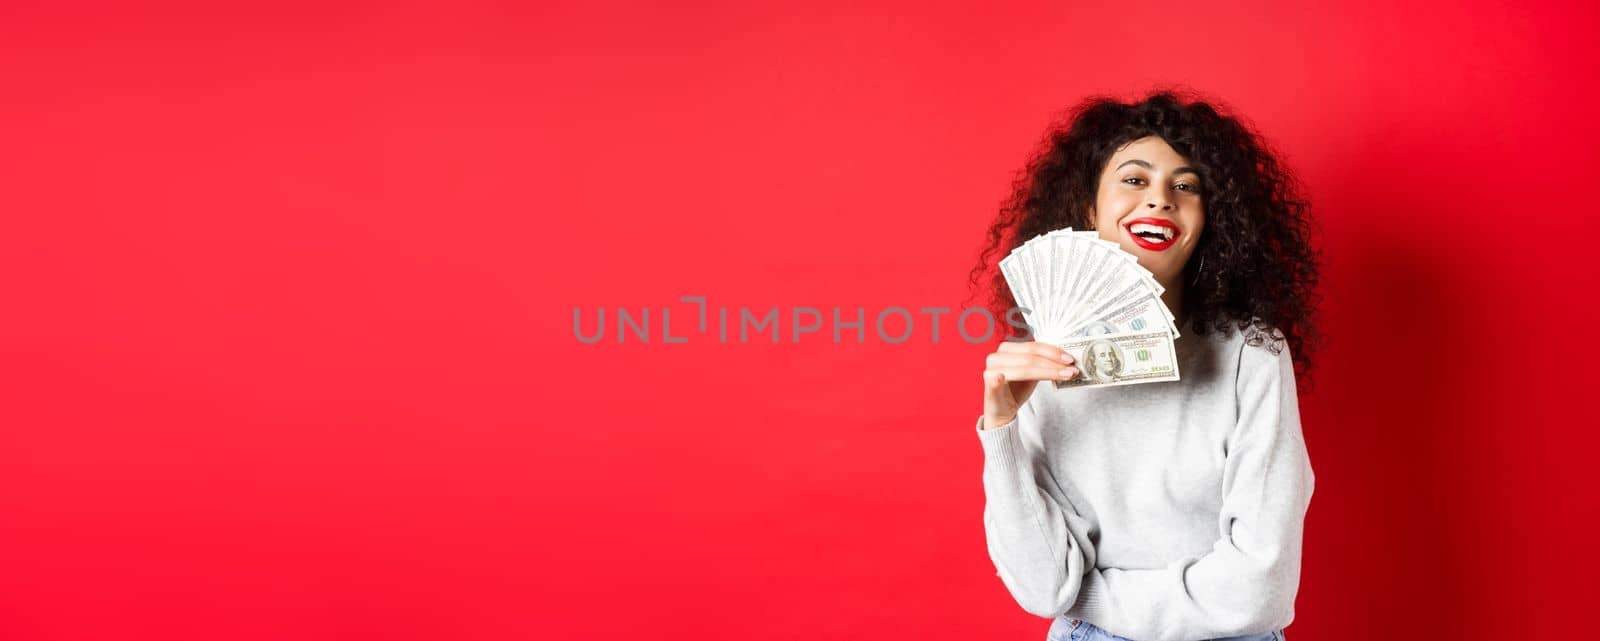 Successful young woman waiving dollar bills and smiling pleased. Rich girl showing money, standing over red background.